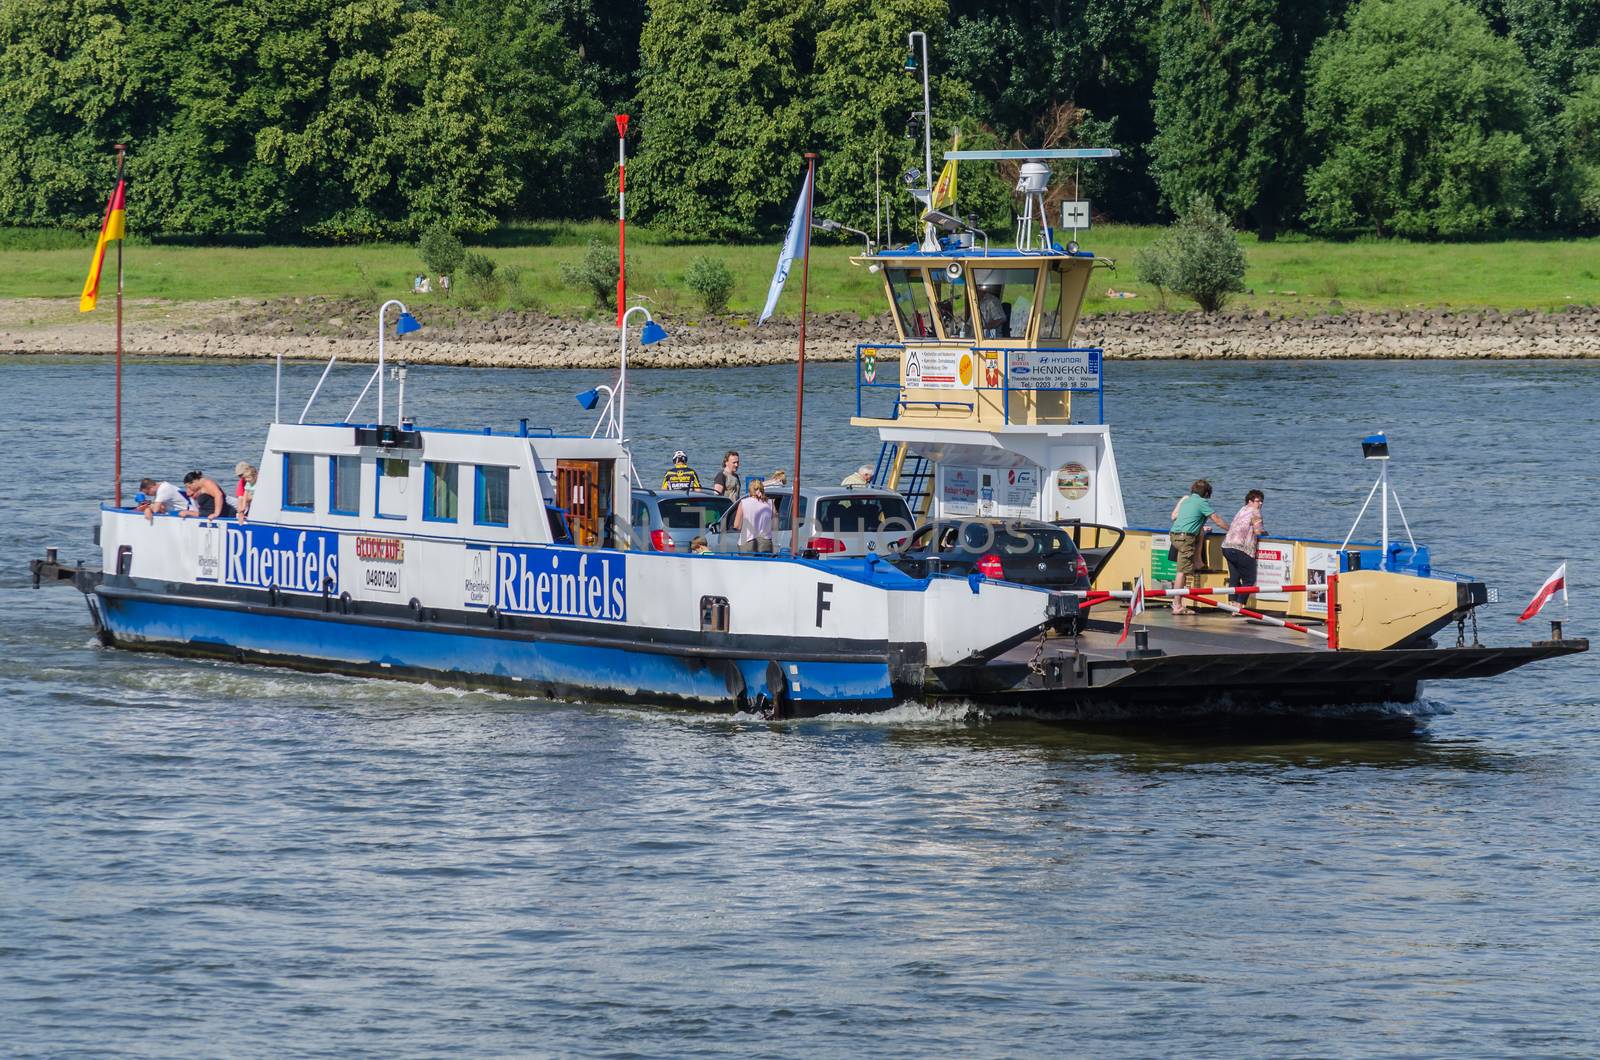 Orsoy, Nrw,  Germany - June 09, 2014:  Ferry City Orsoy on the Rhine. The ferry connects Orsoy in NRW, the city of Duisburg Walsum. Some passengers on the ship